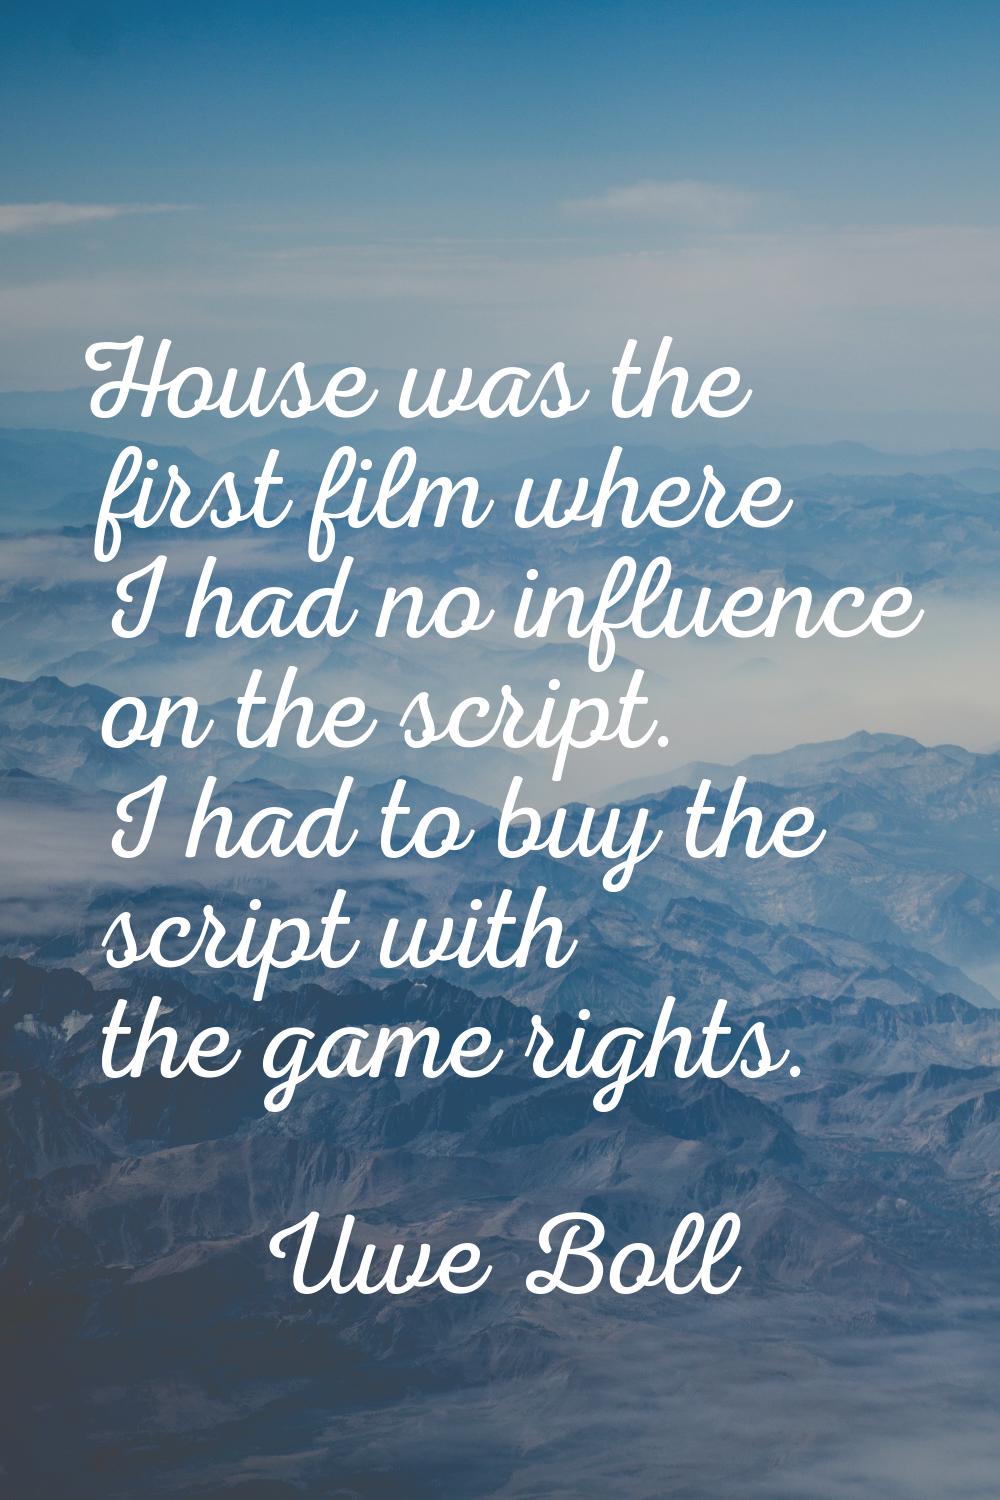 House was the first film where I had no influence on the script. I had to buy the script with the g